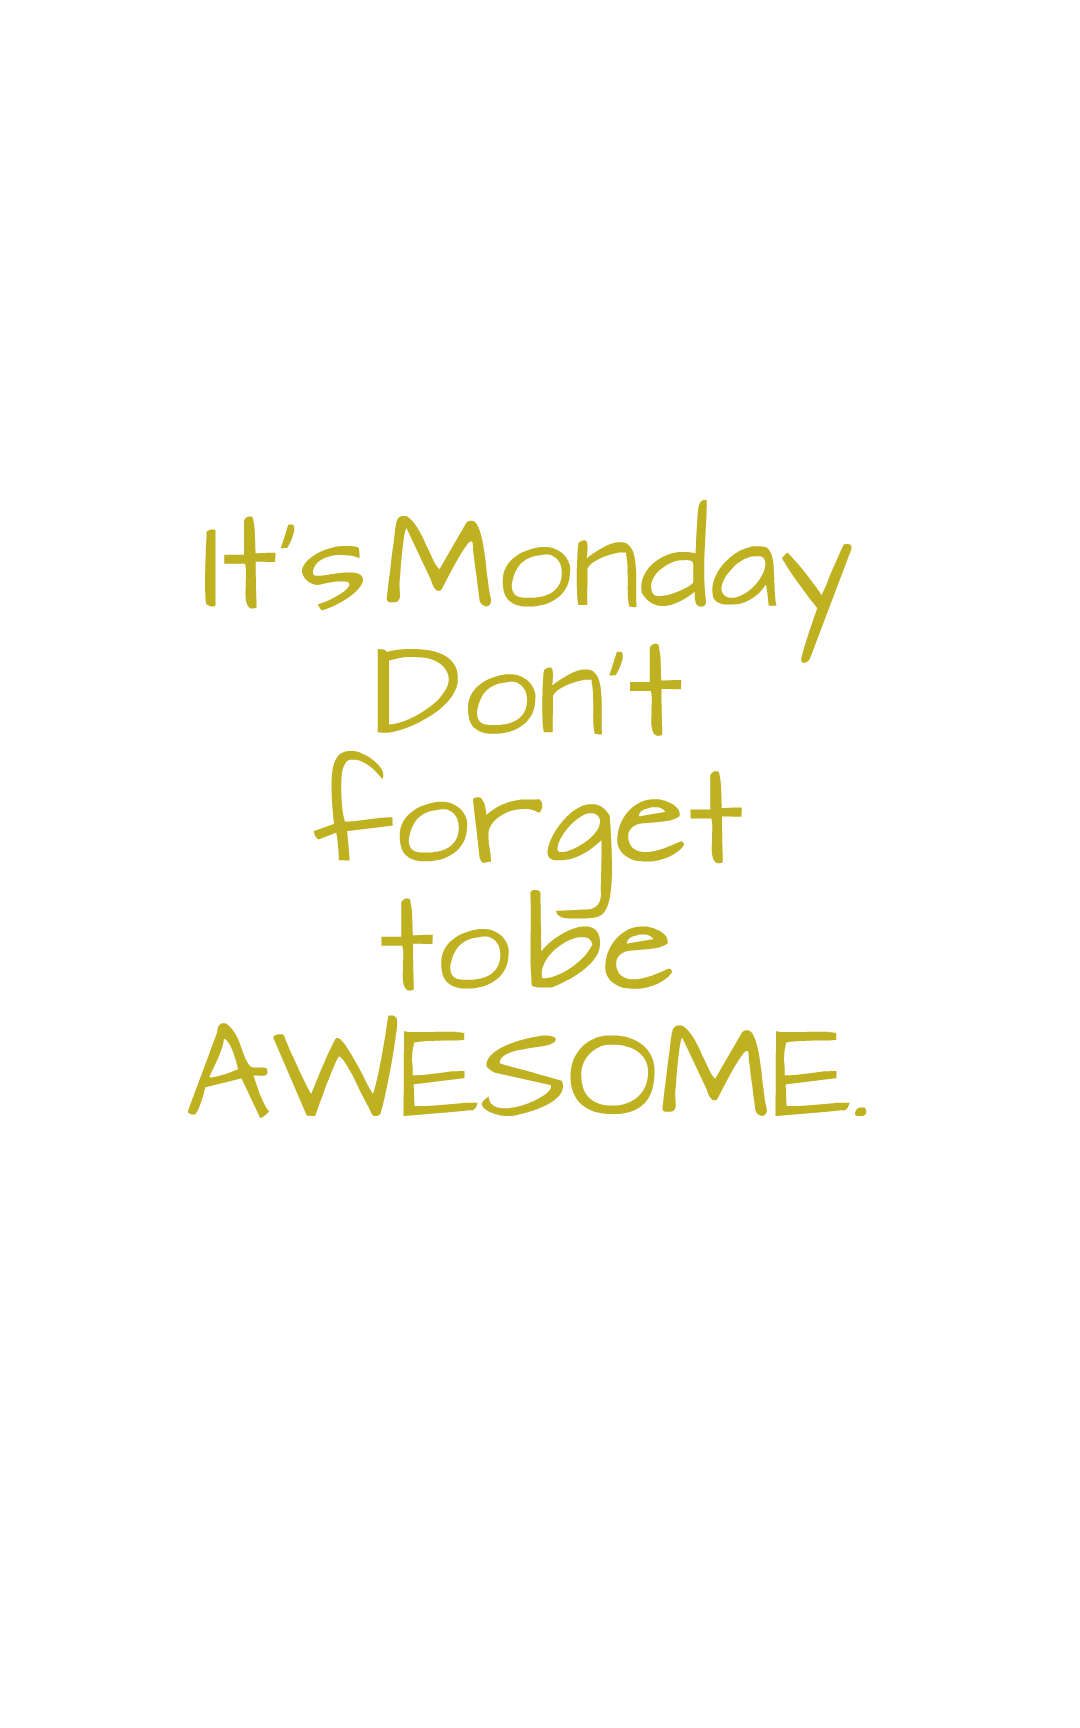 It's Monday Don’t forget to be AWESOME.